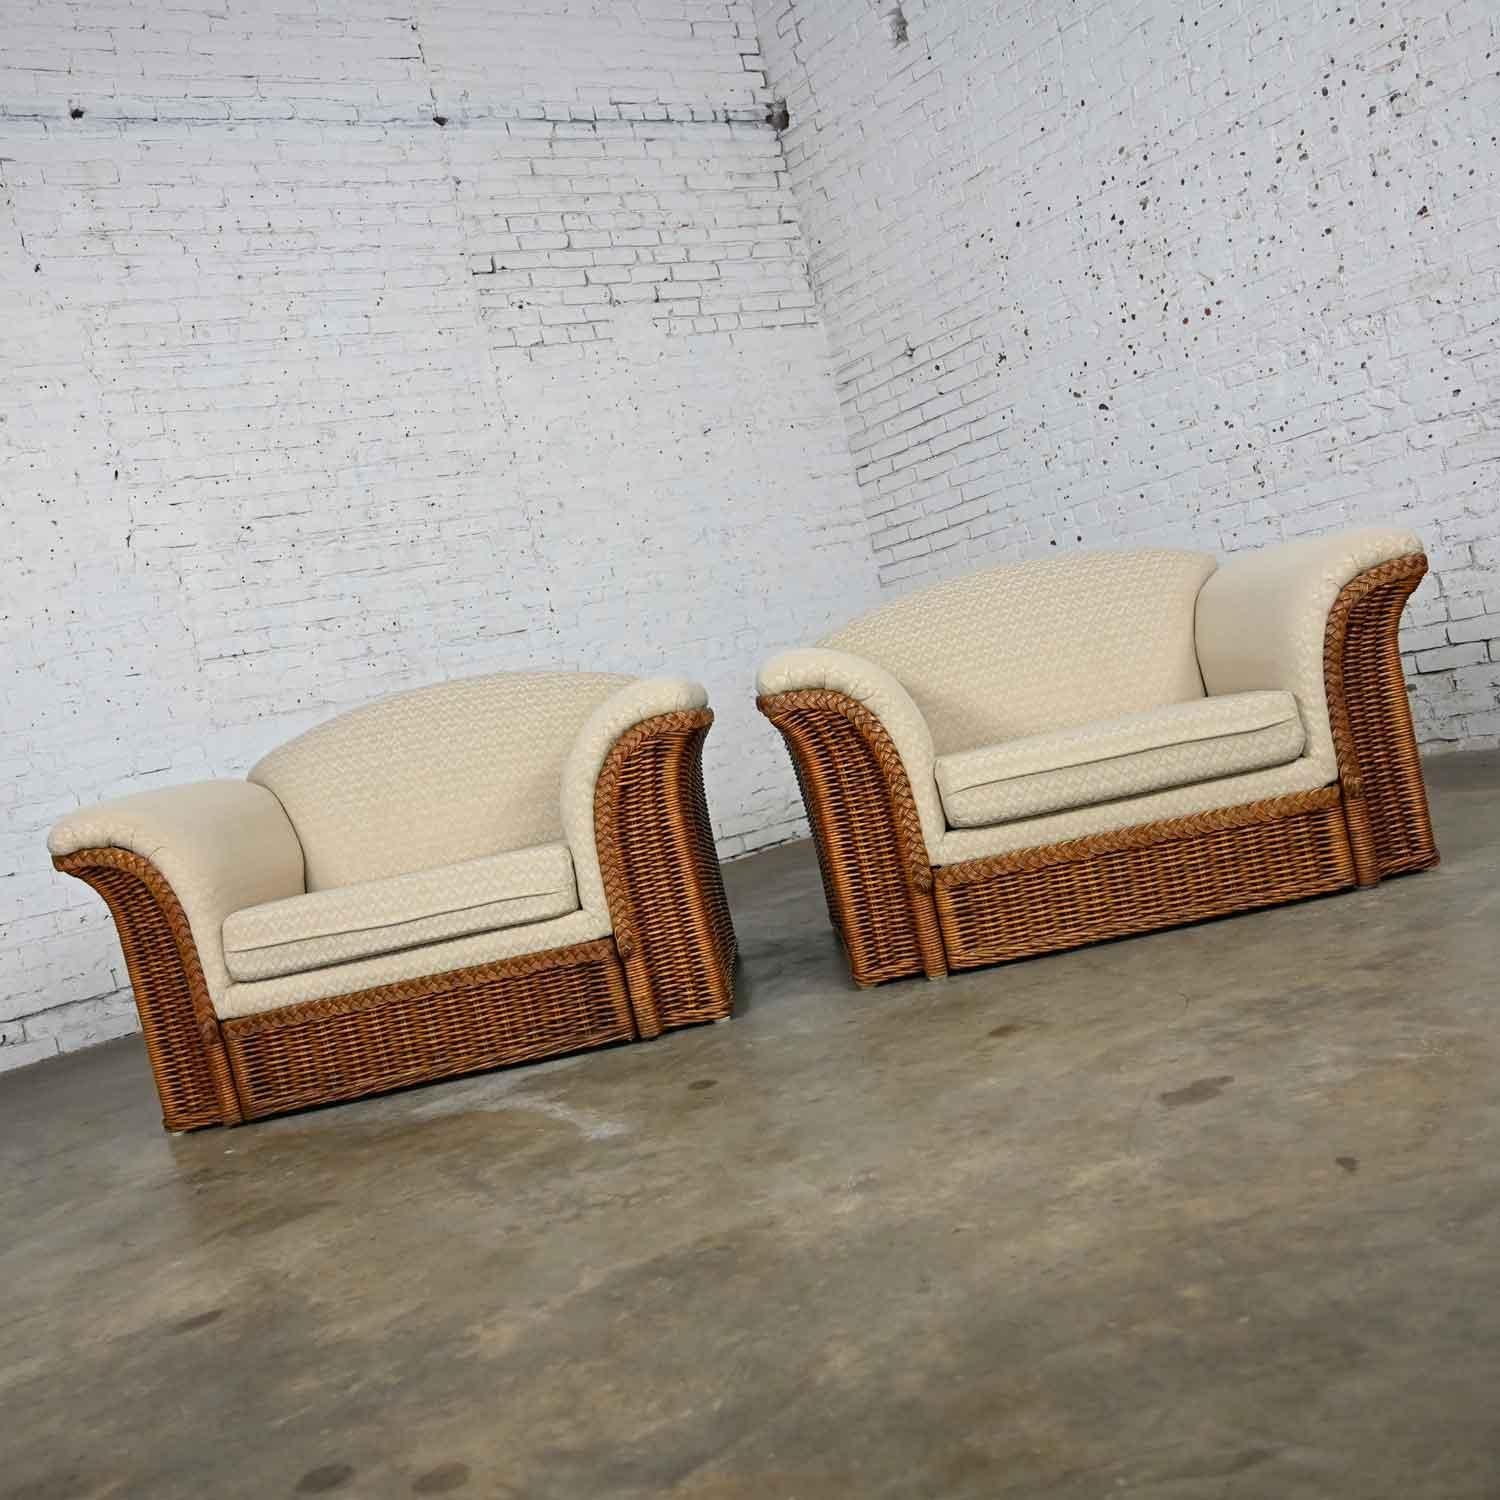 Rattan Wicker Pair of Oversized Lounge Chairs Manner of Michael Taylor For Sale 2